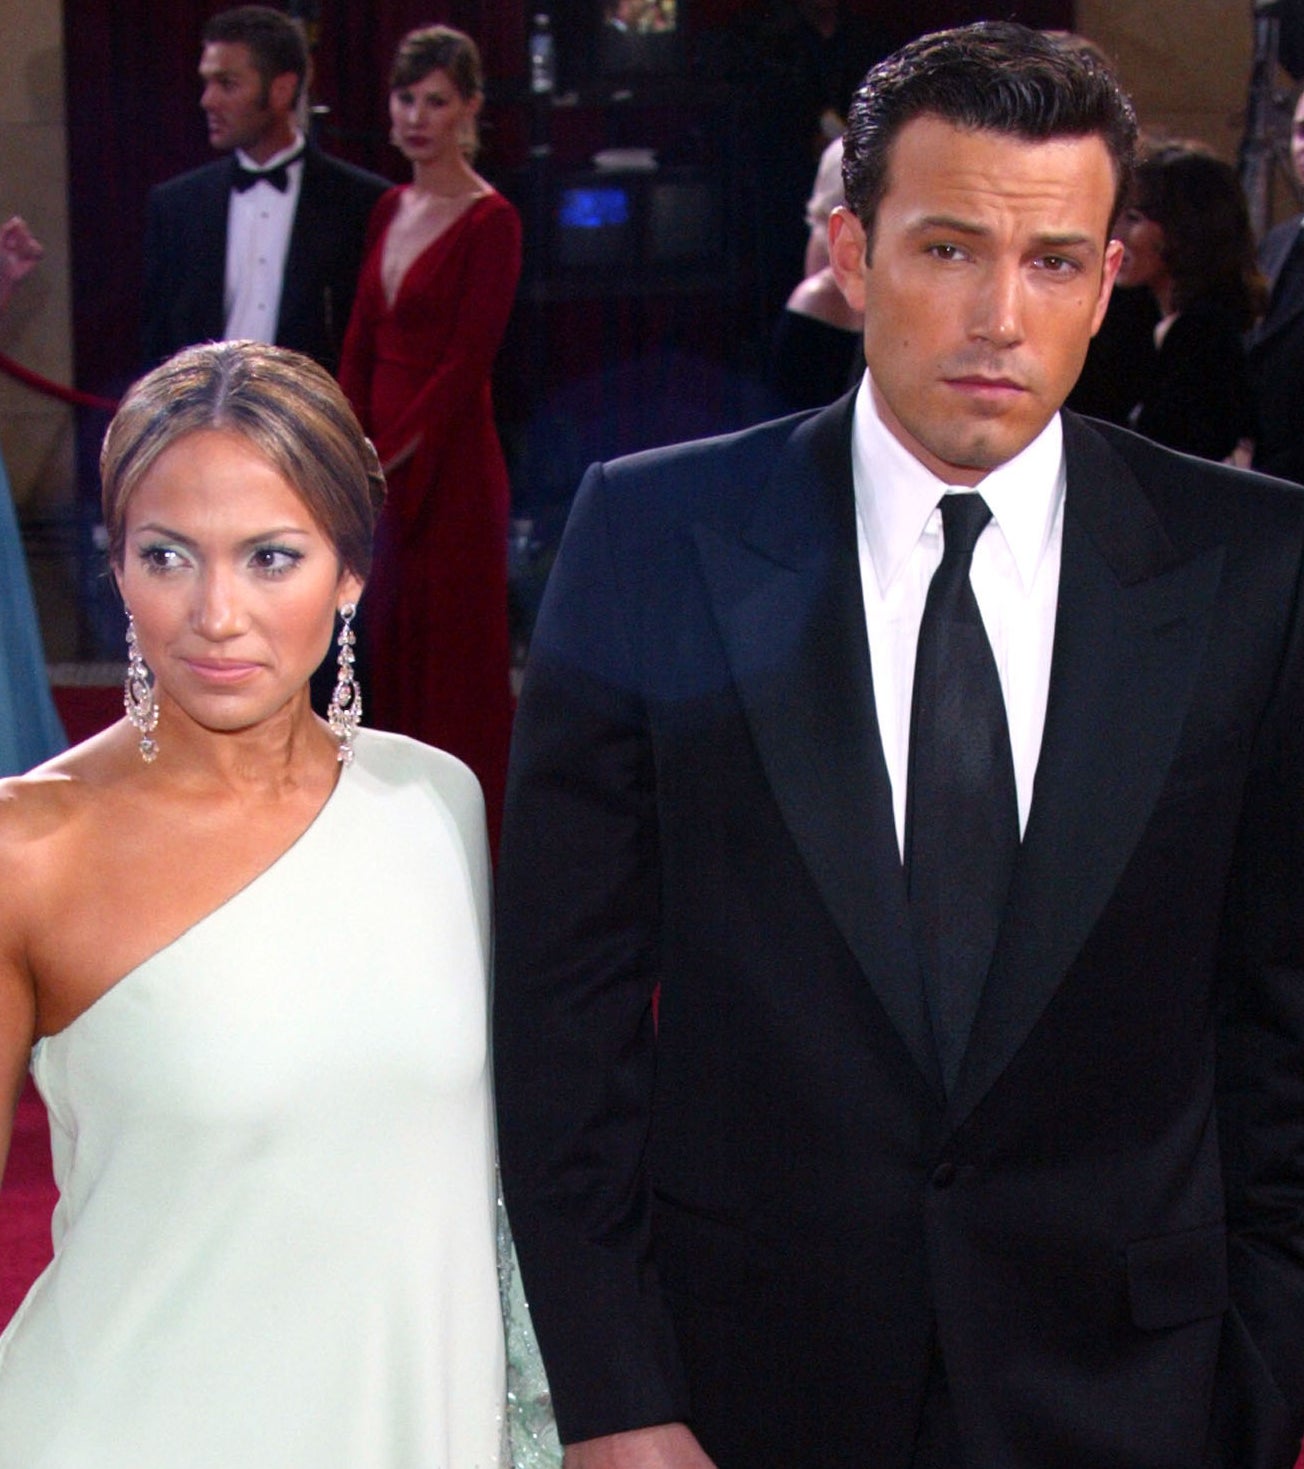 Close-up of JLo and Ben on the red carpet